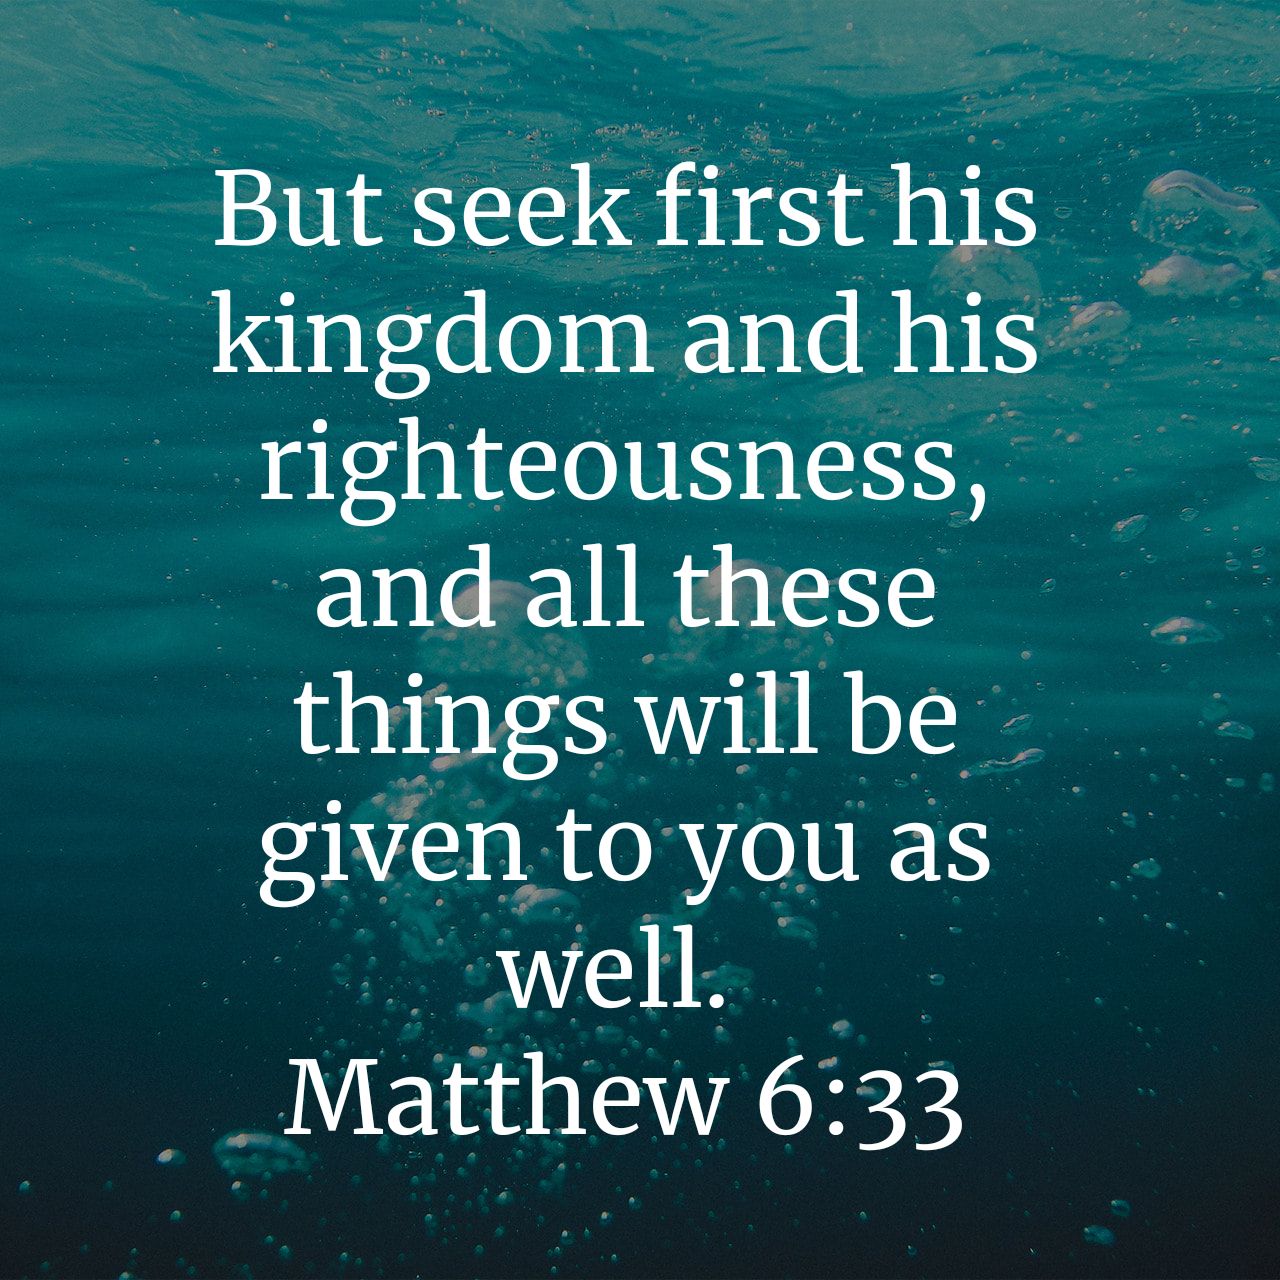 But seek first his kingdom and his righteousness, and all these things will be given to you as well: Matthew 6.33